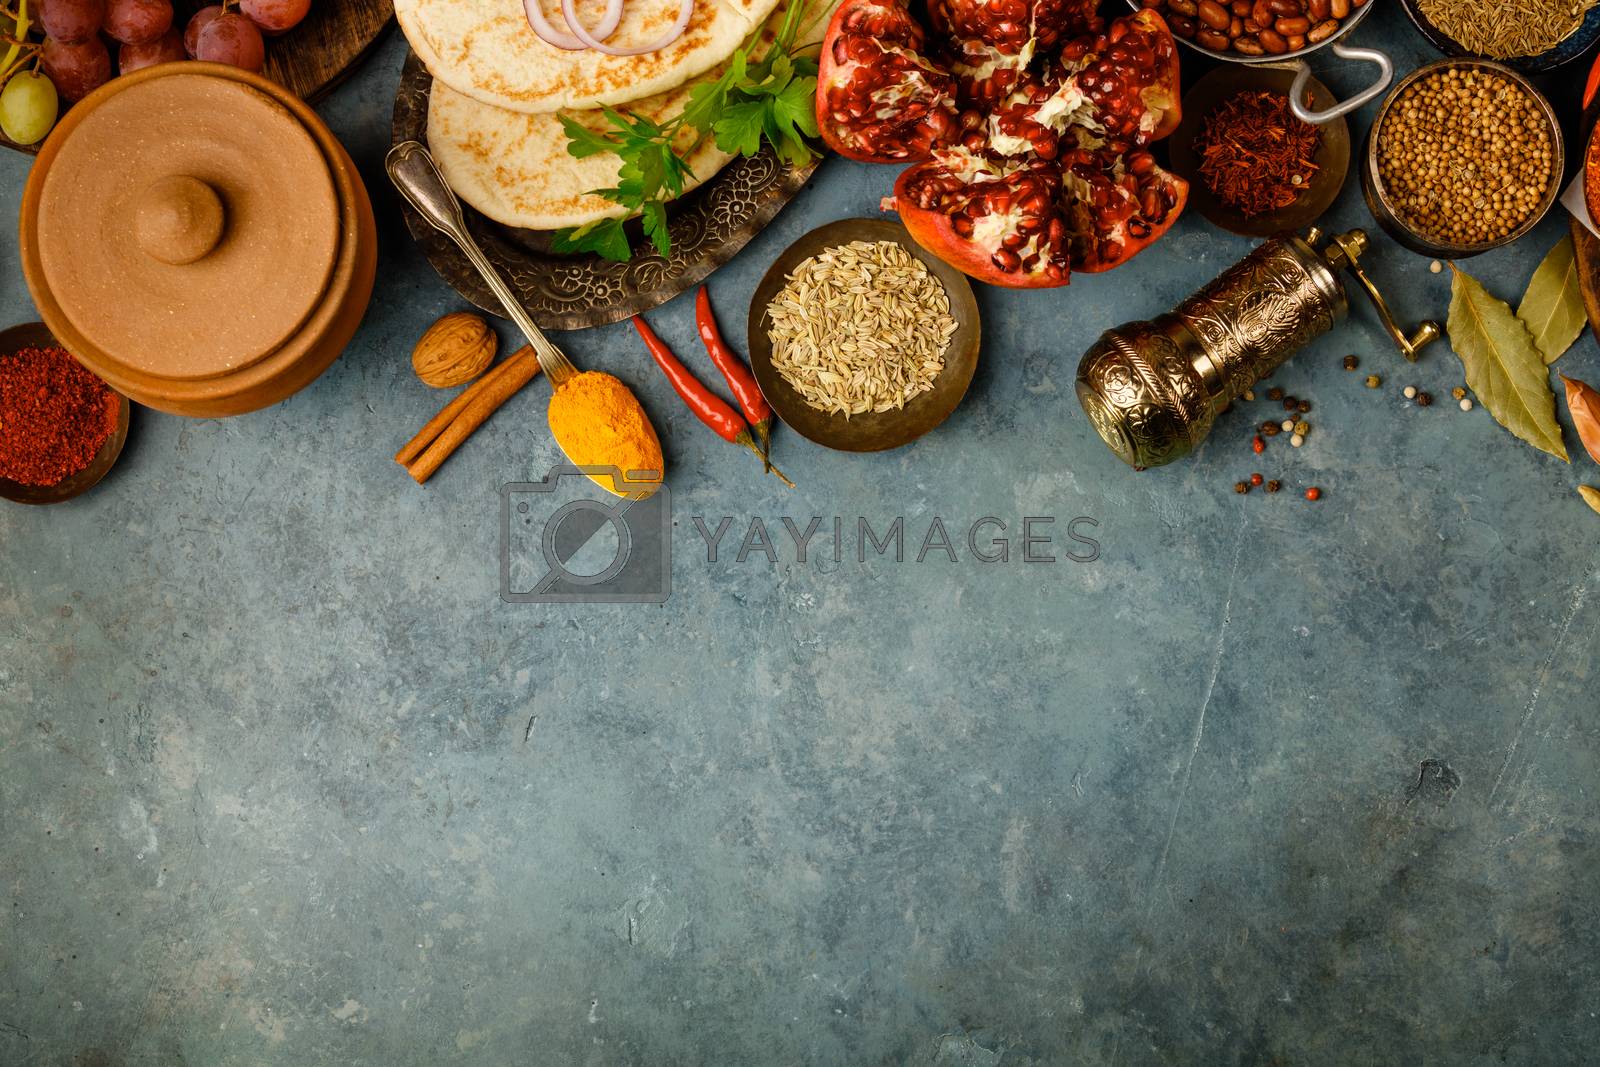 Royalty free image of Middle eastern or arabic tradition ingredients by klenova